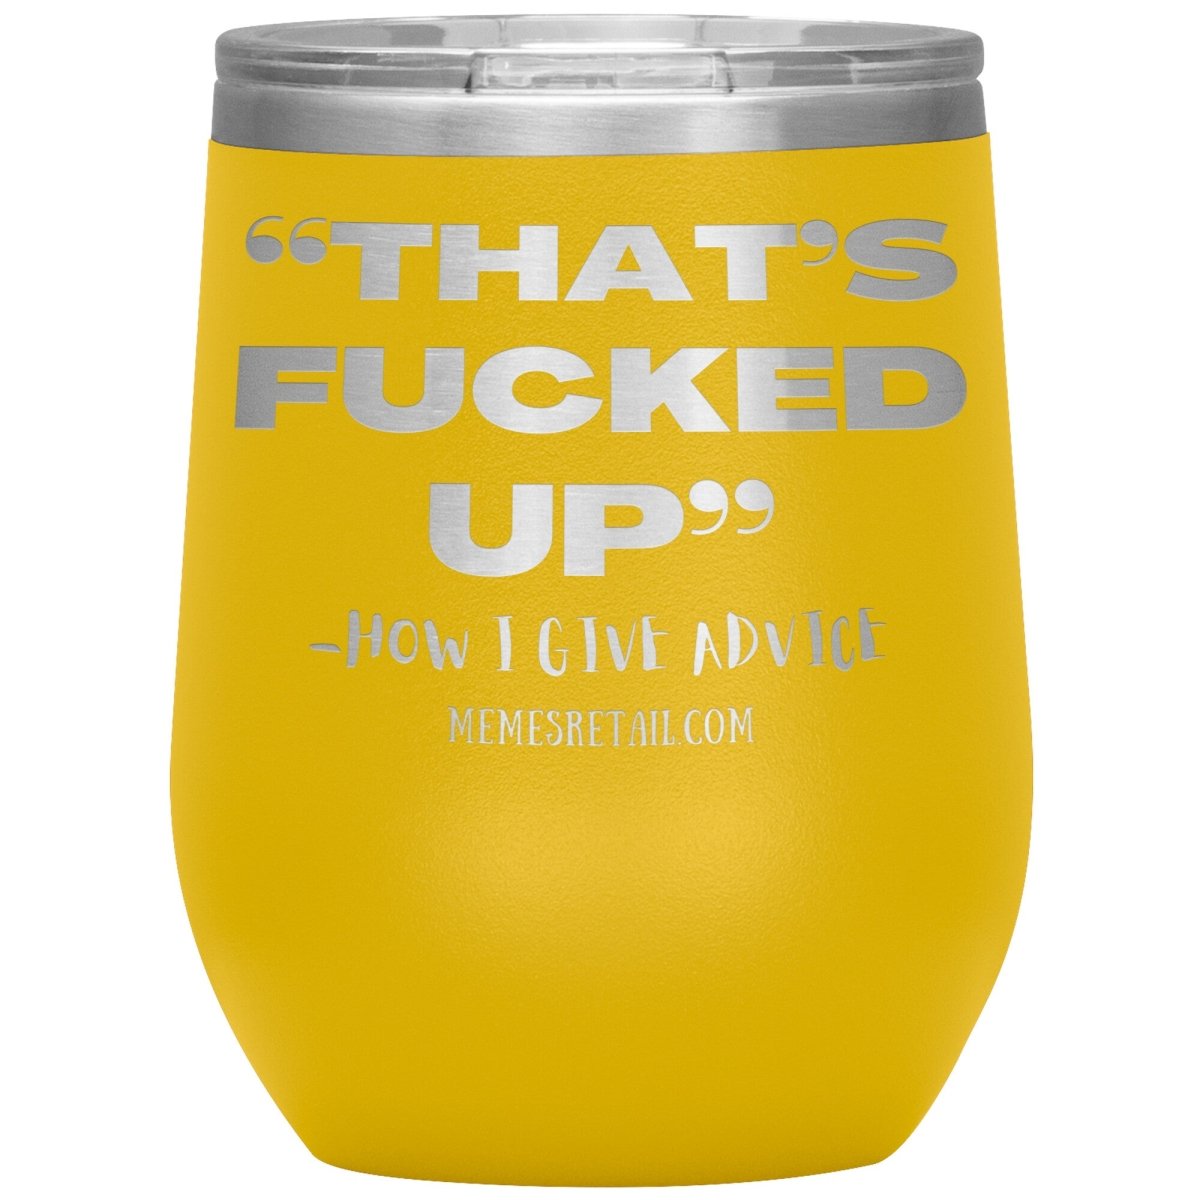 “That’s Fucked Up” -how I give advice Tumblers, 12oz Wine Insulated Tumbler / Yellow - MemesRetail.com